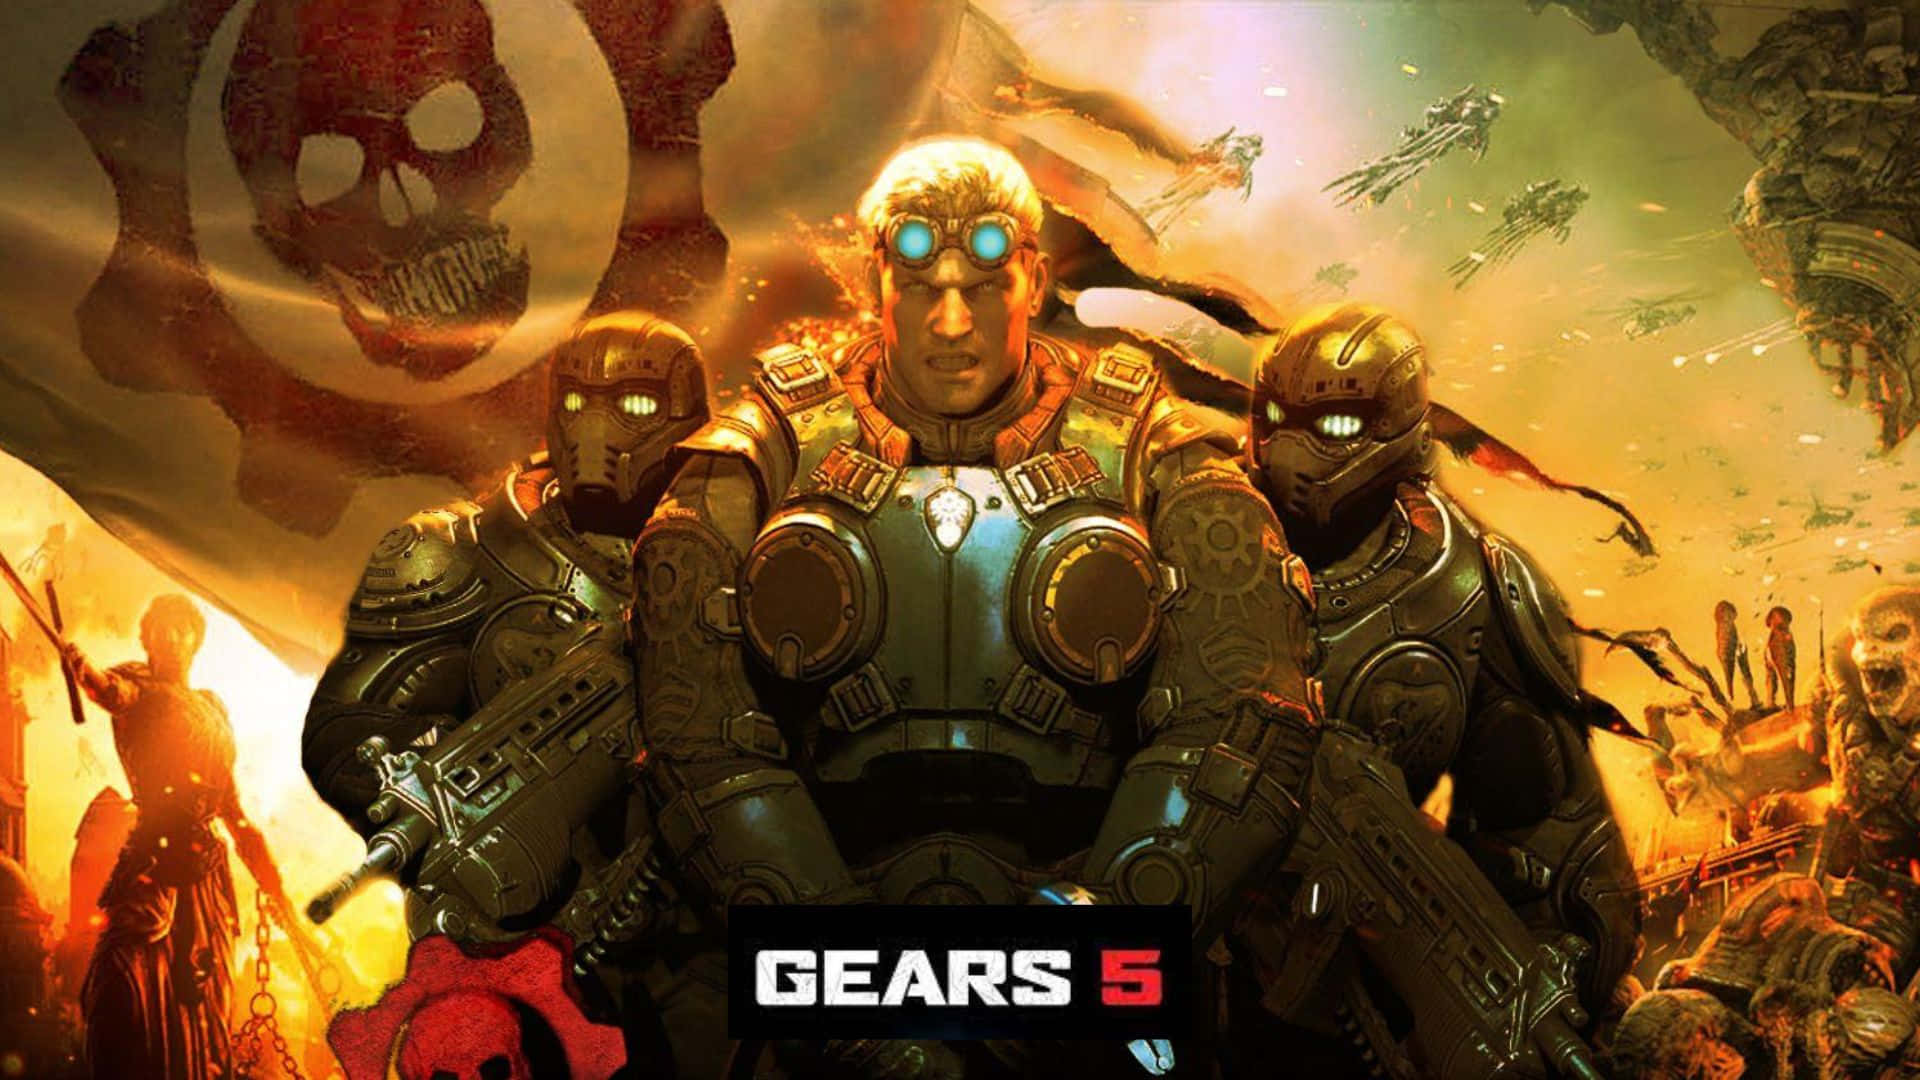 "Gears Of War 5 Brings Epic Chaos And Adventure To Xbox Series X"